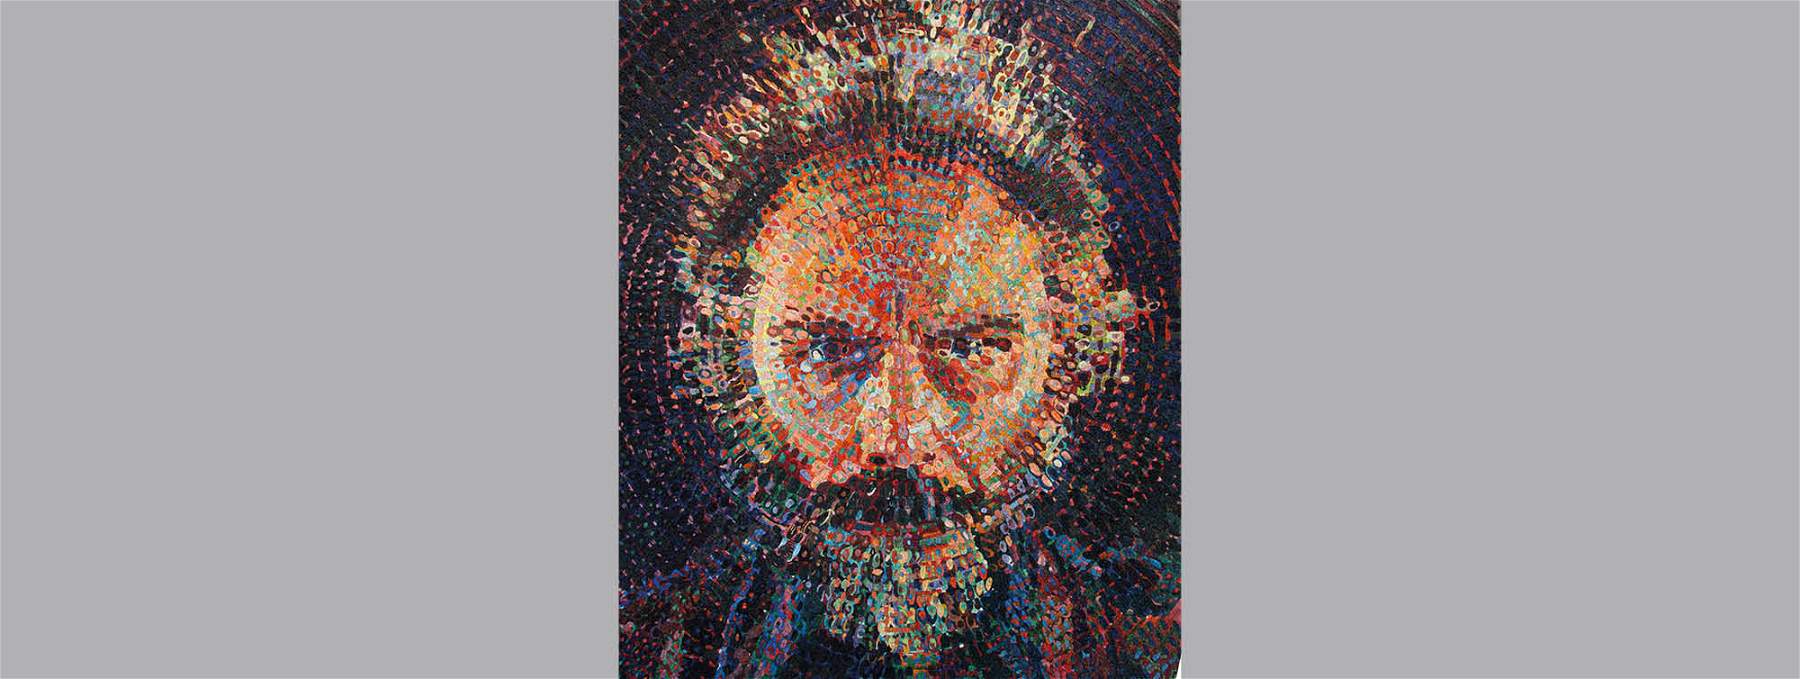 In Ravenna, Chuck Close's mosaics displayed in an exhibition